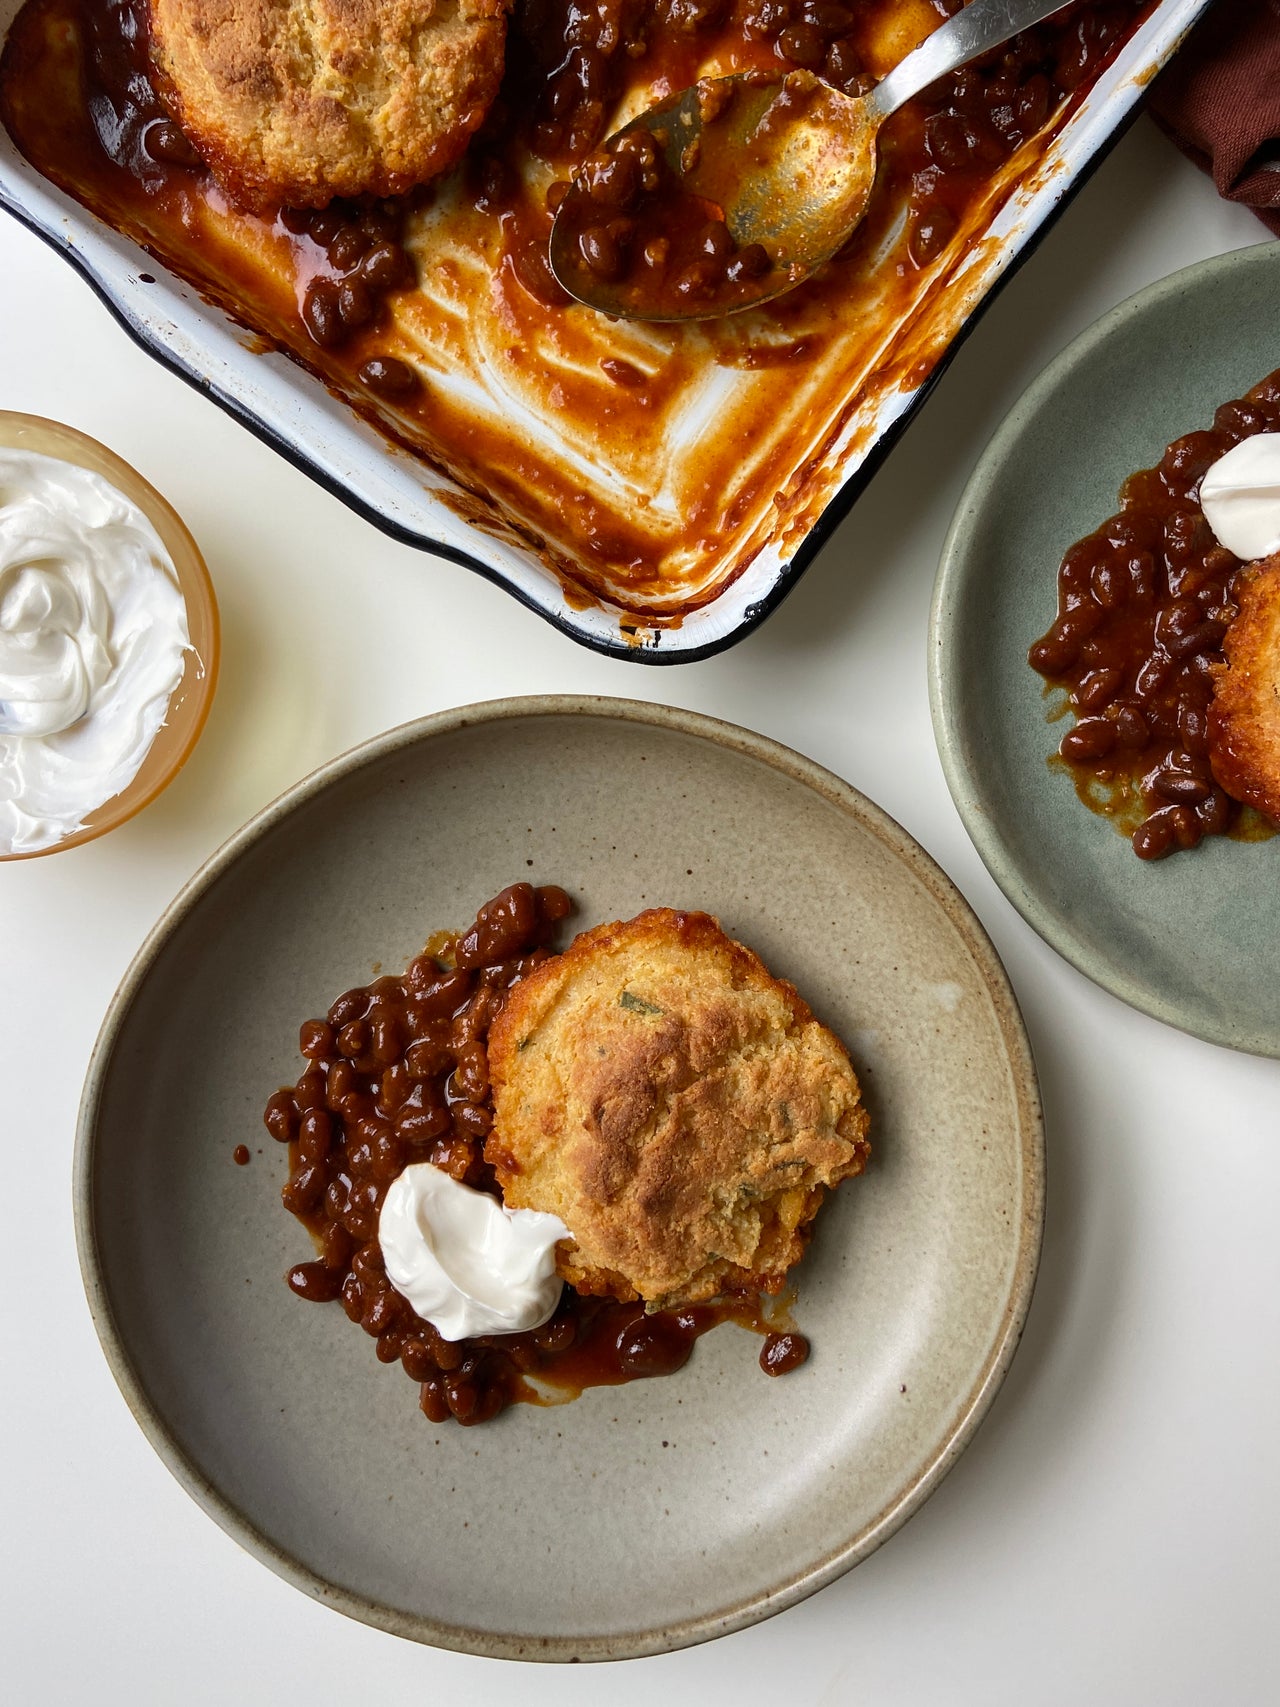 Ali Slagle for Heyday: Apricot Baked Beans with Cornmeal-Sage Biscuits